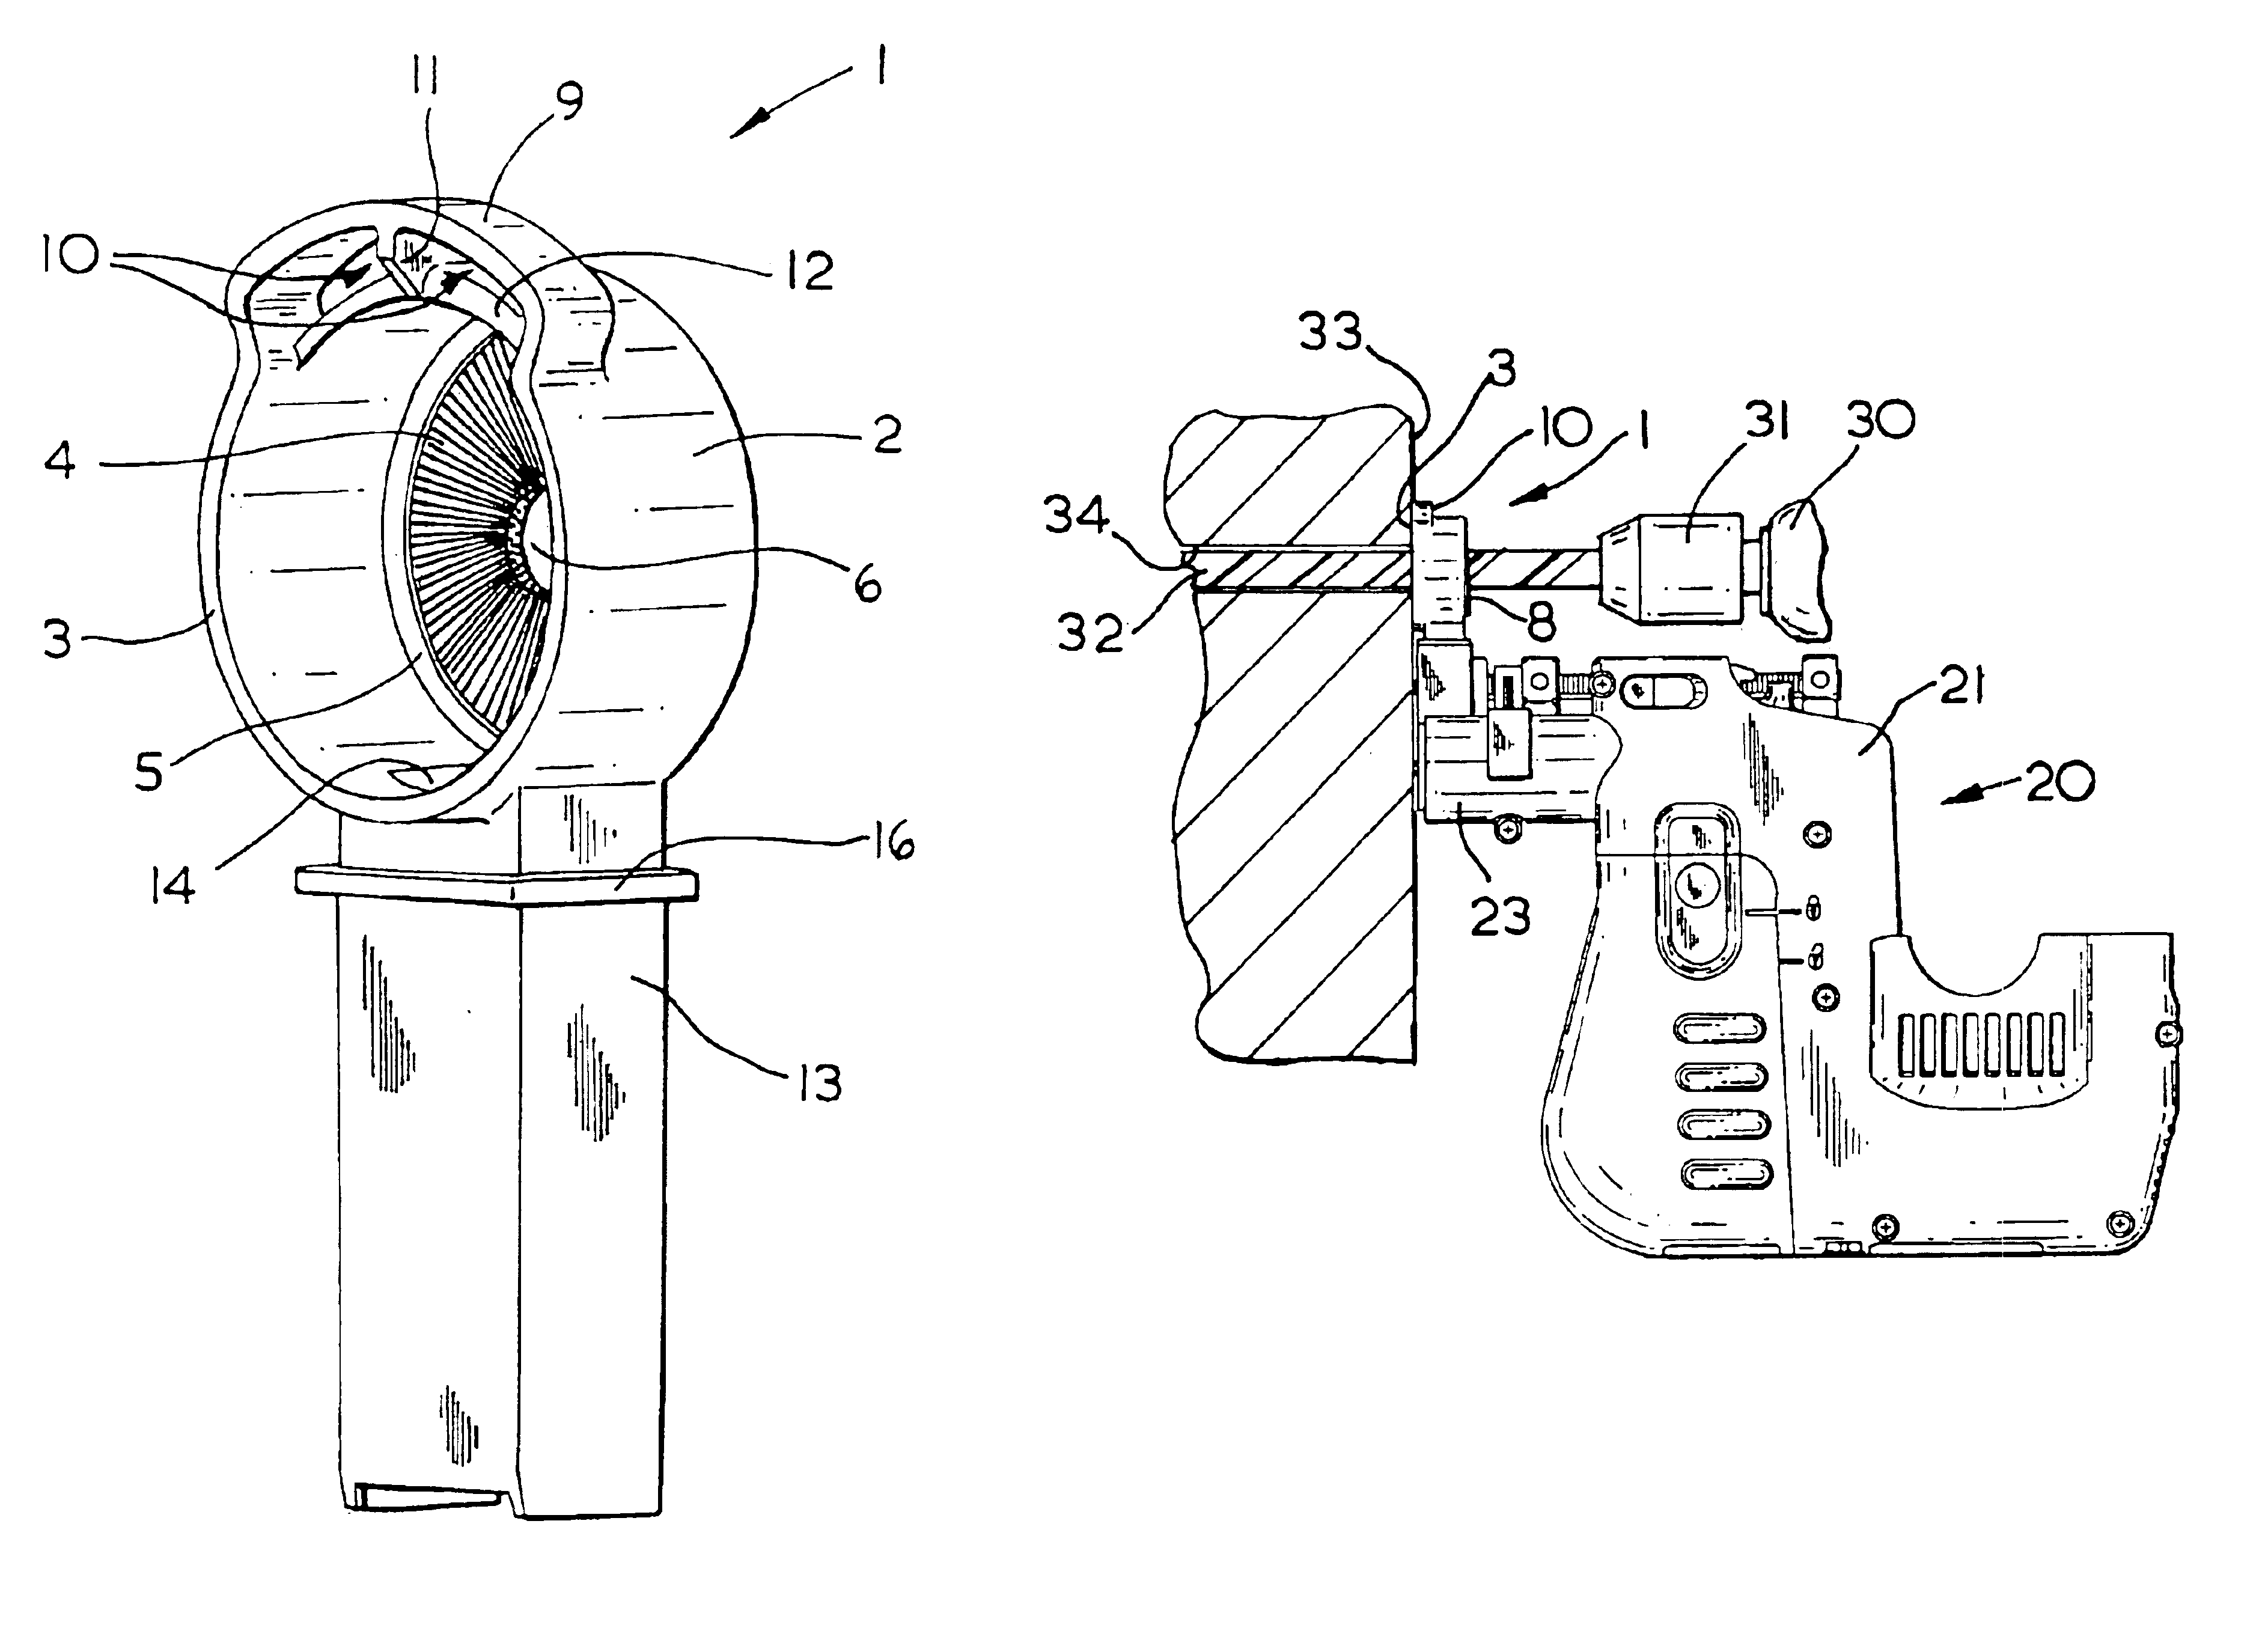 Dust extraction shroud for a power tool